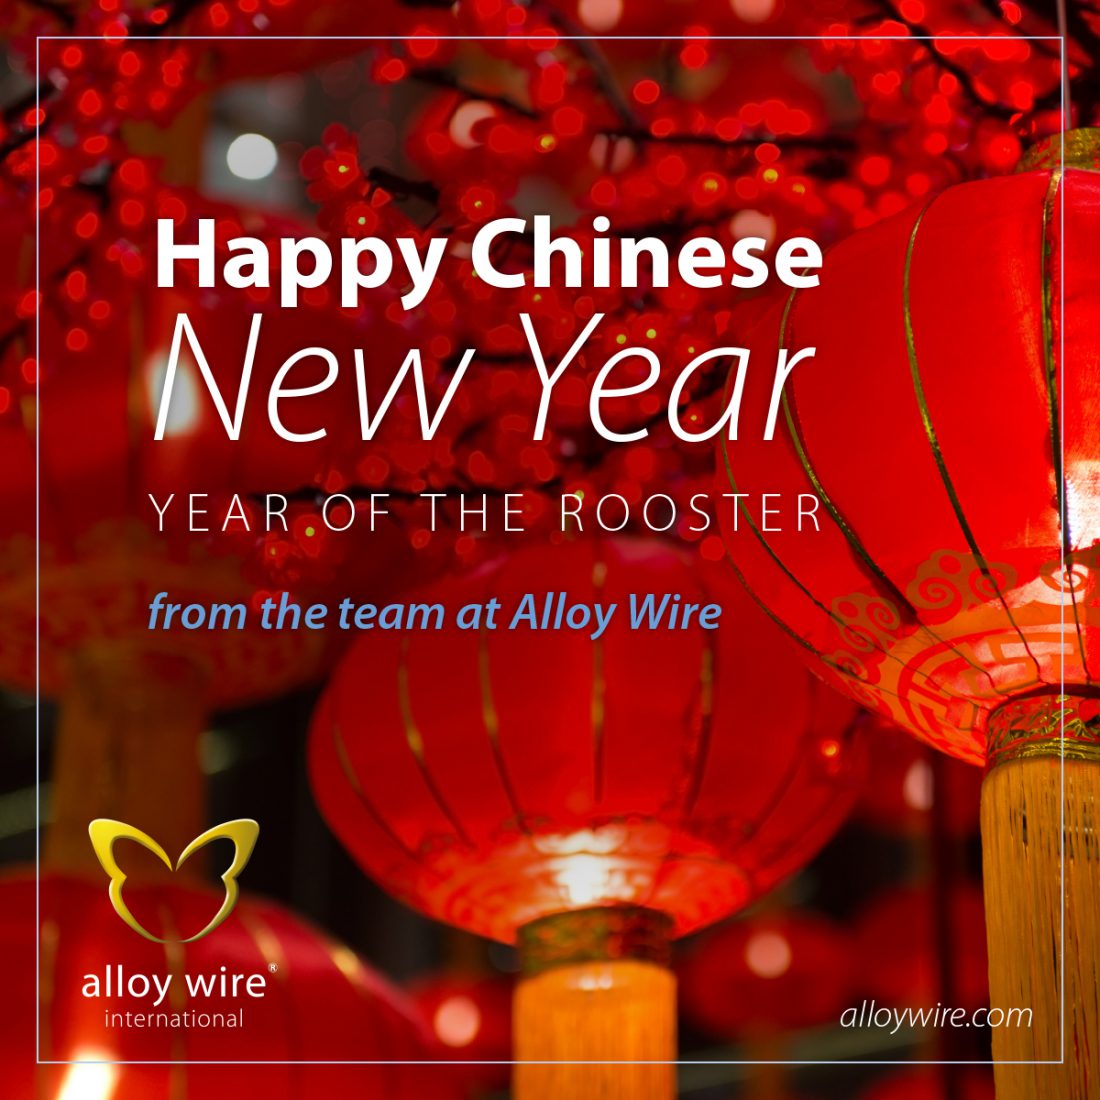 Happy Chinese New Year 2017 - Alloy Wire International 11